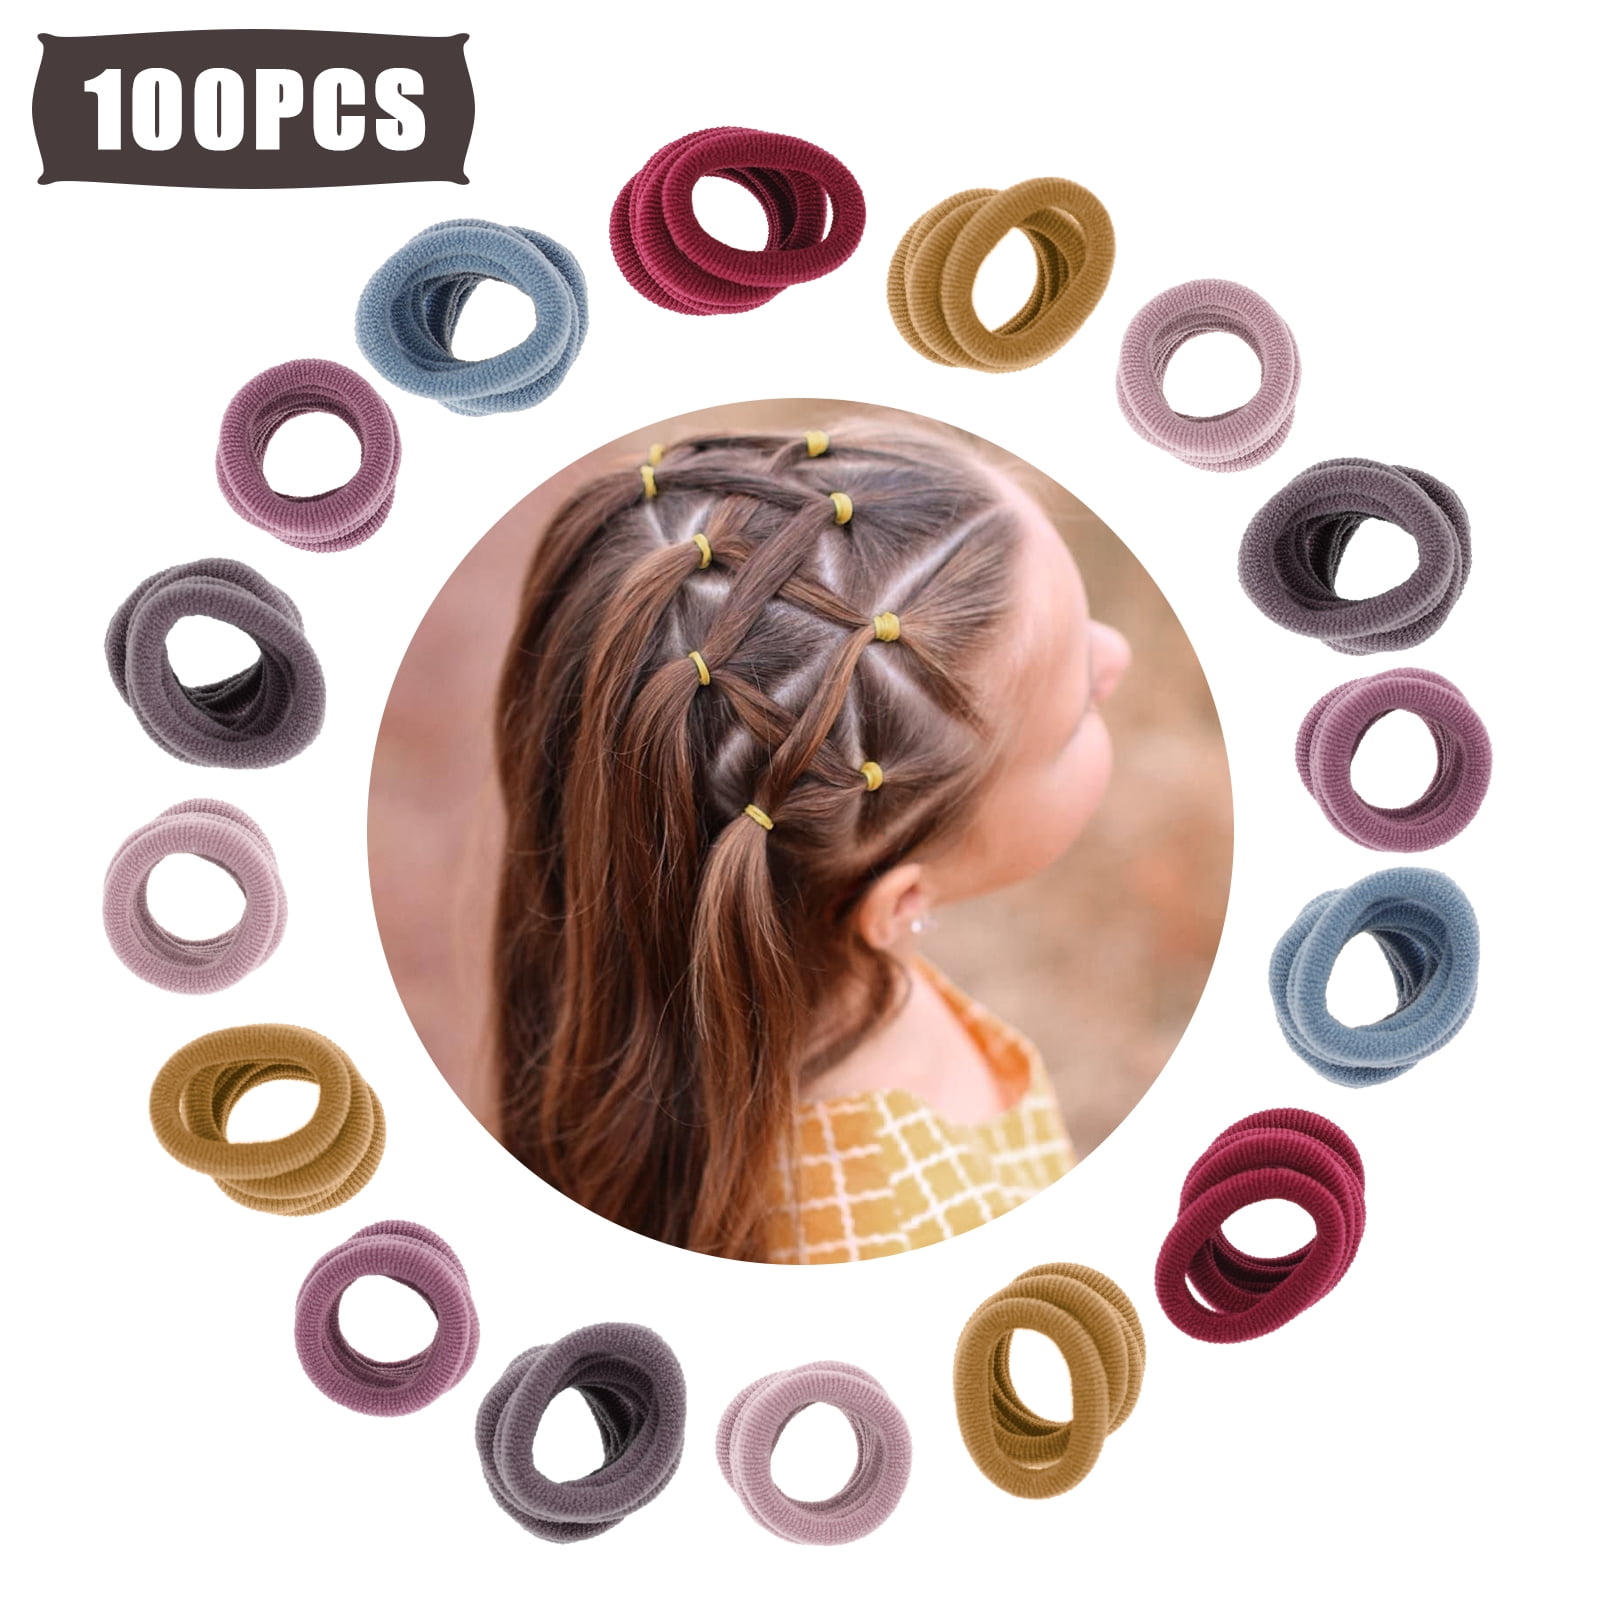 100Pcs Baby Hair Ties, Cotton Toddler Hair Ties for Girls and Kids,  Multicolor Small Seamless Hair Bands Elastic Ponytail Holders, Seamless  Cotton Hair Ties in Bulk Mixed Colors Ponytail Holder 